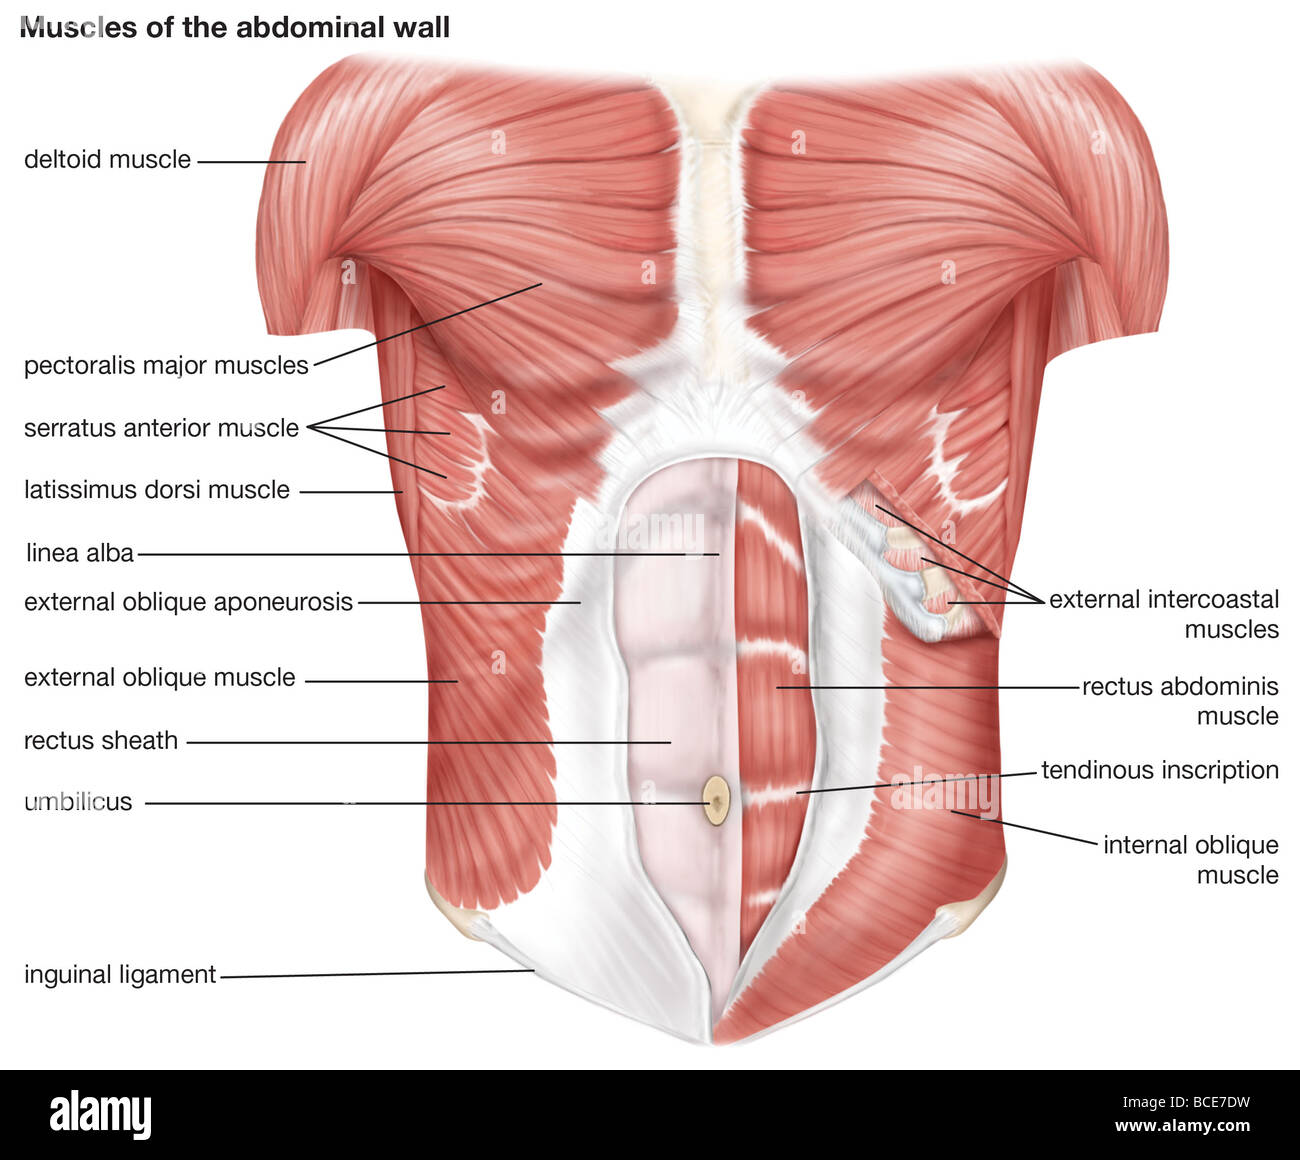 The muscles of the human abdominal wall. Stock Photo